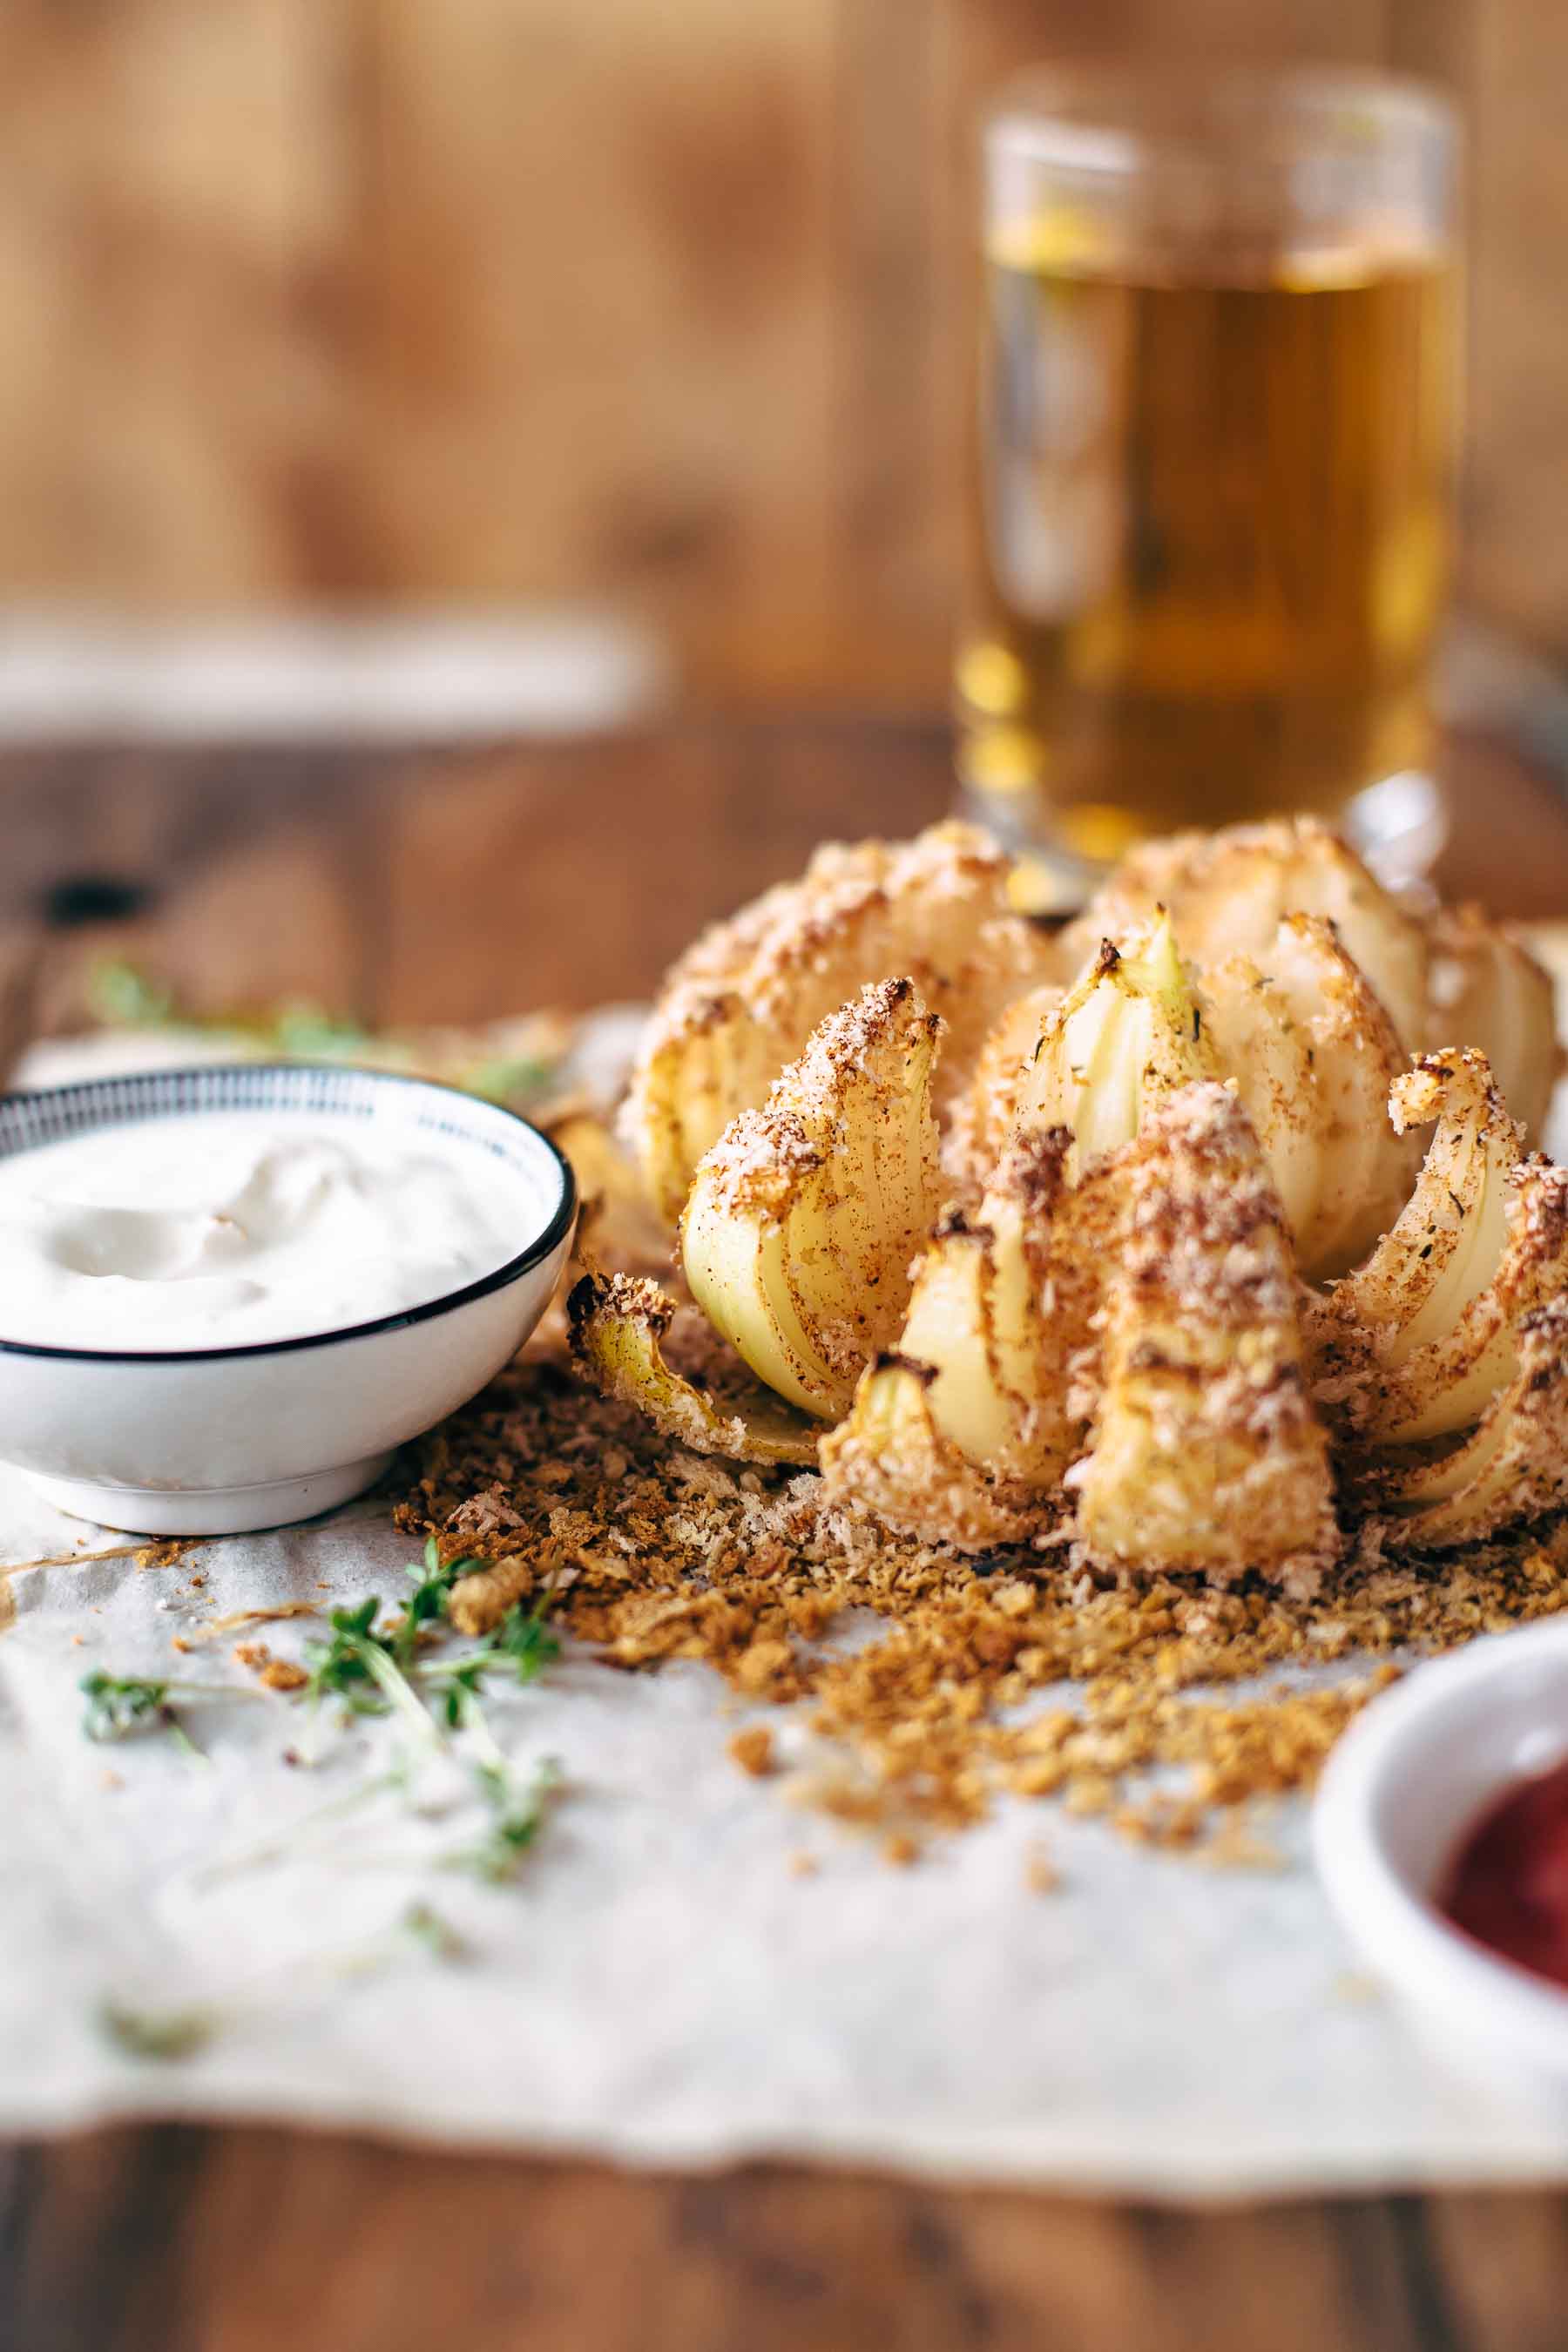 https://www.thecookierookie.com/wp-content/uploads/2015/01/Baked-Blooming-Onion-4.jpg